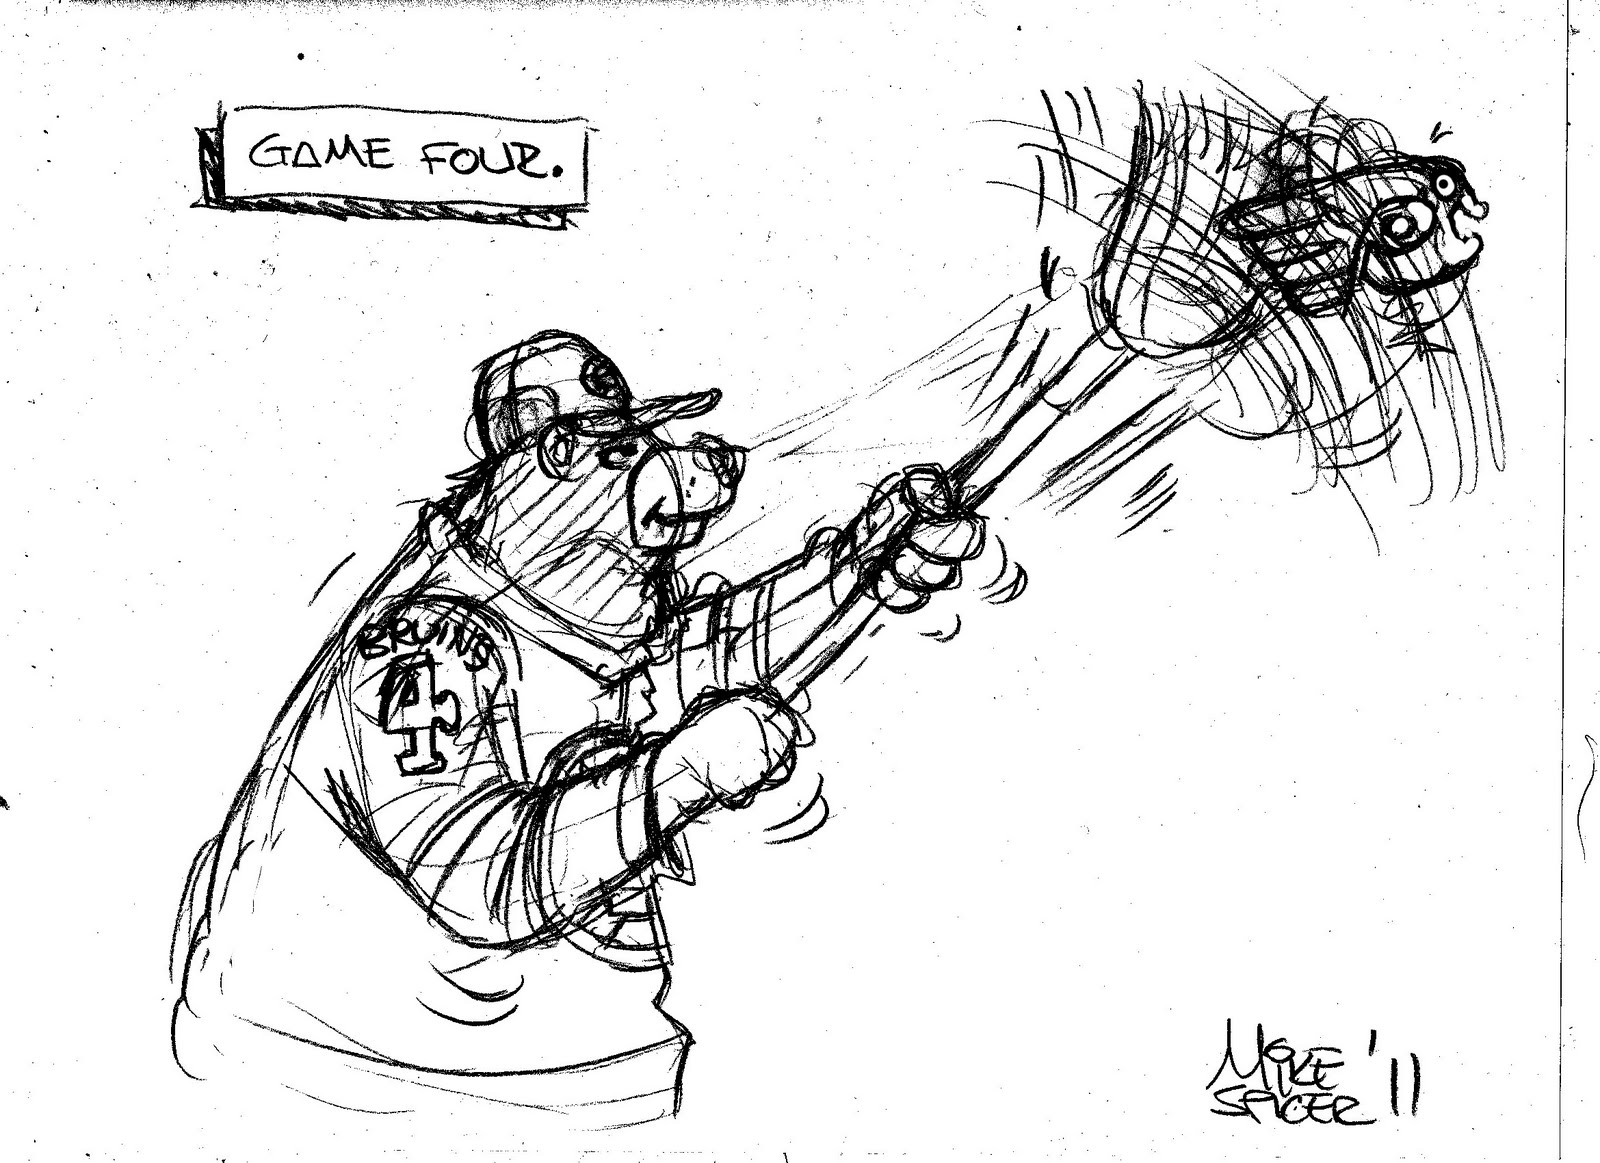 Mike Spicer Cartoonist Caricaturist Game Fourhow Sweep It Is